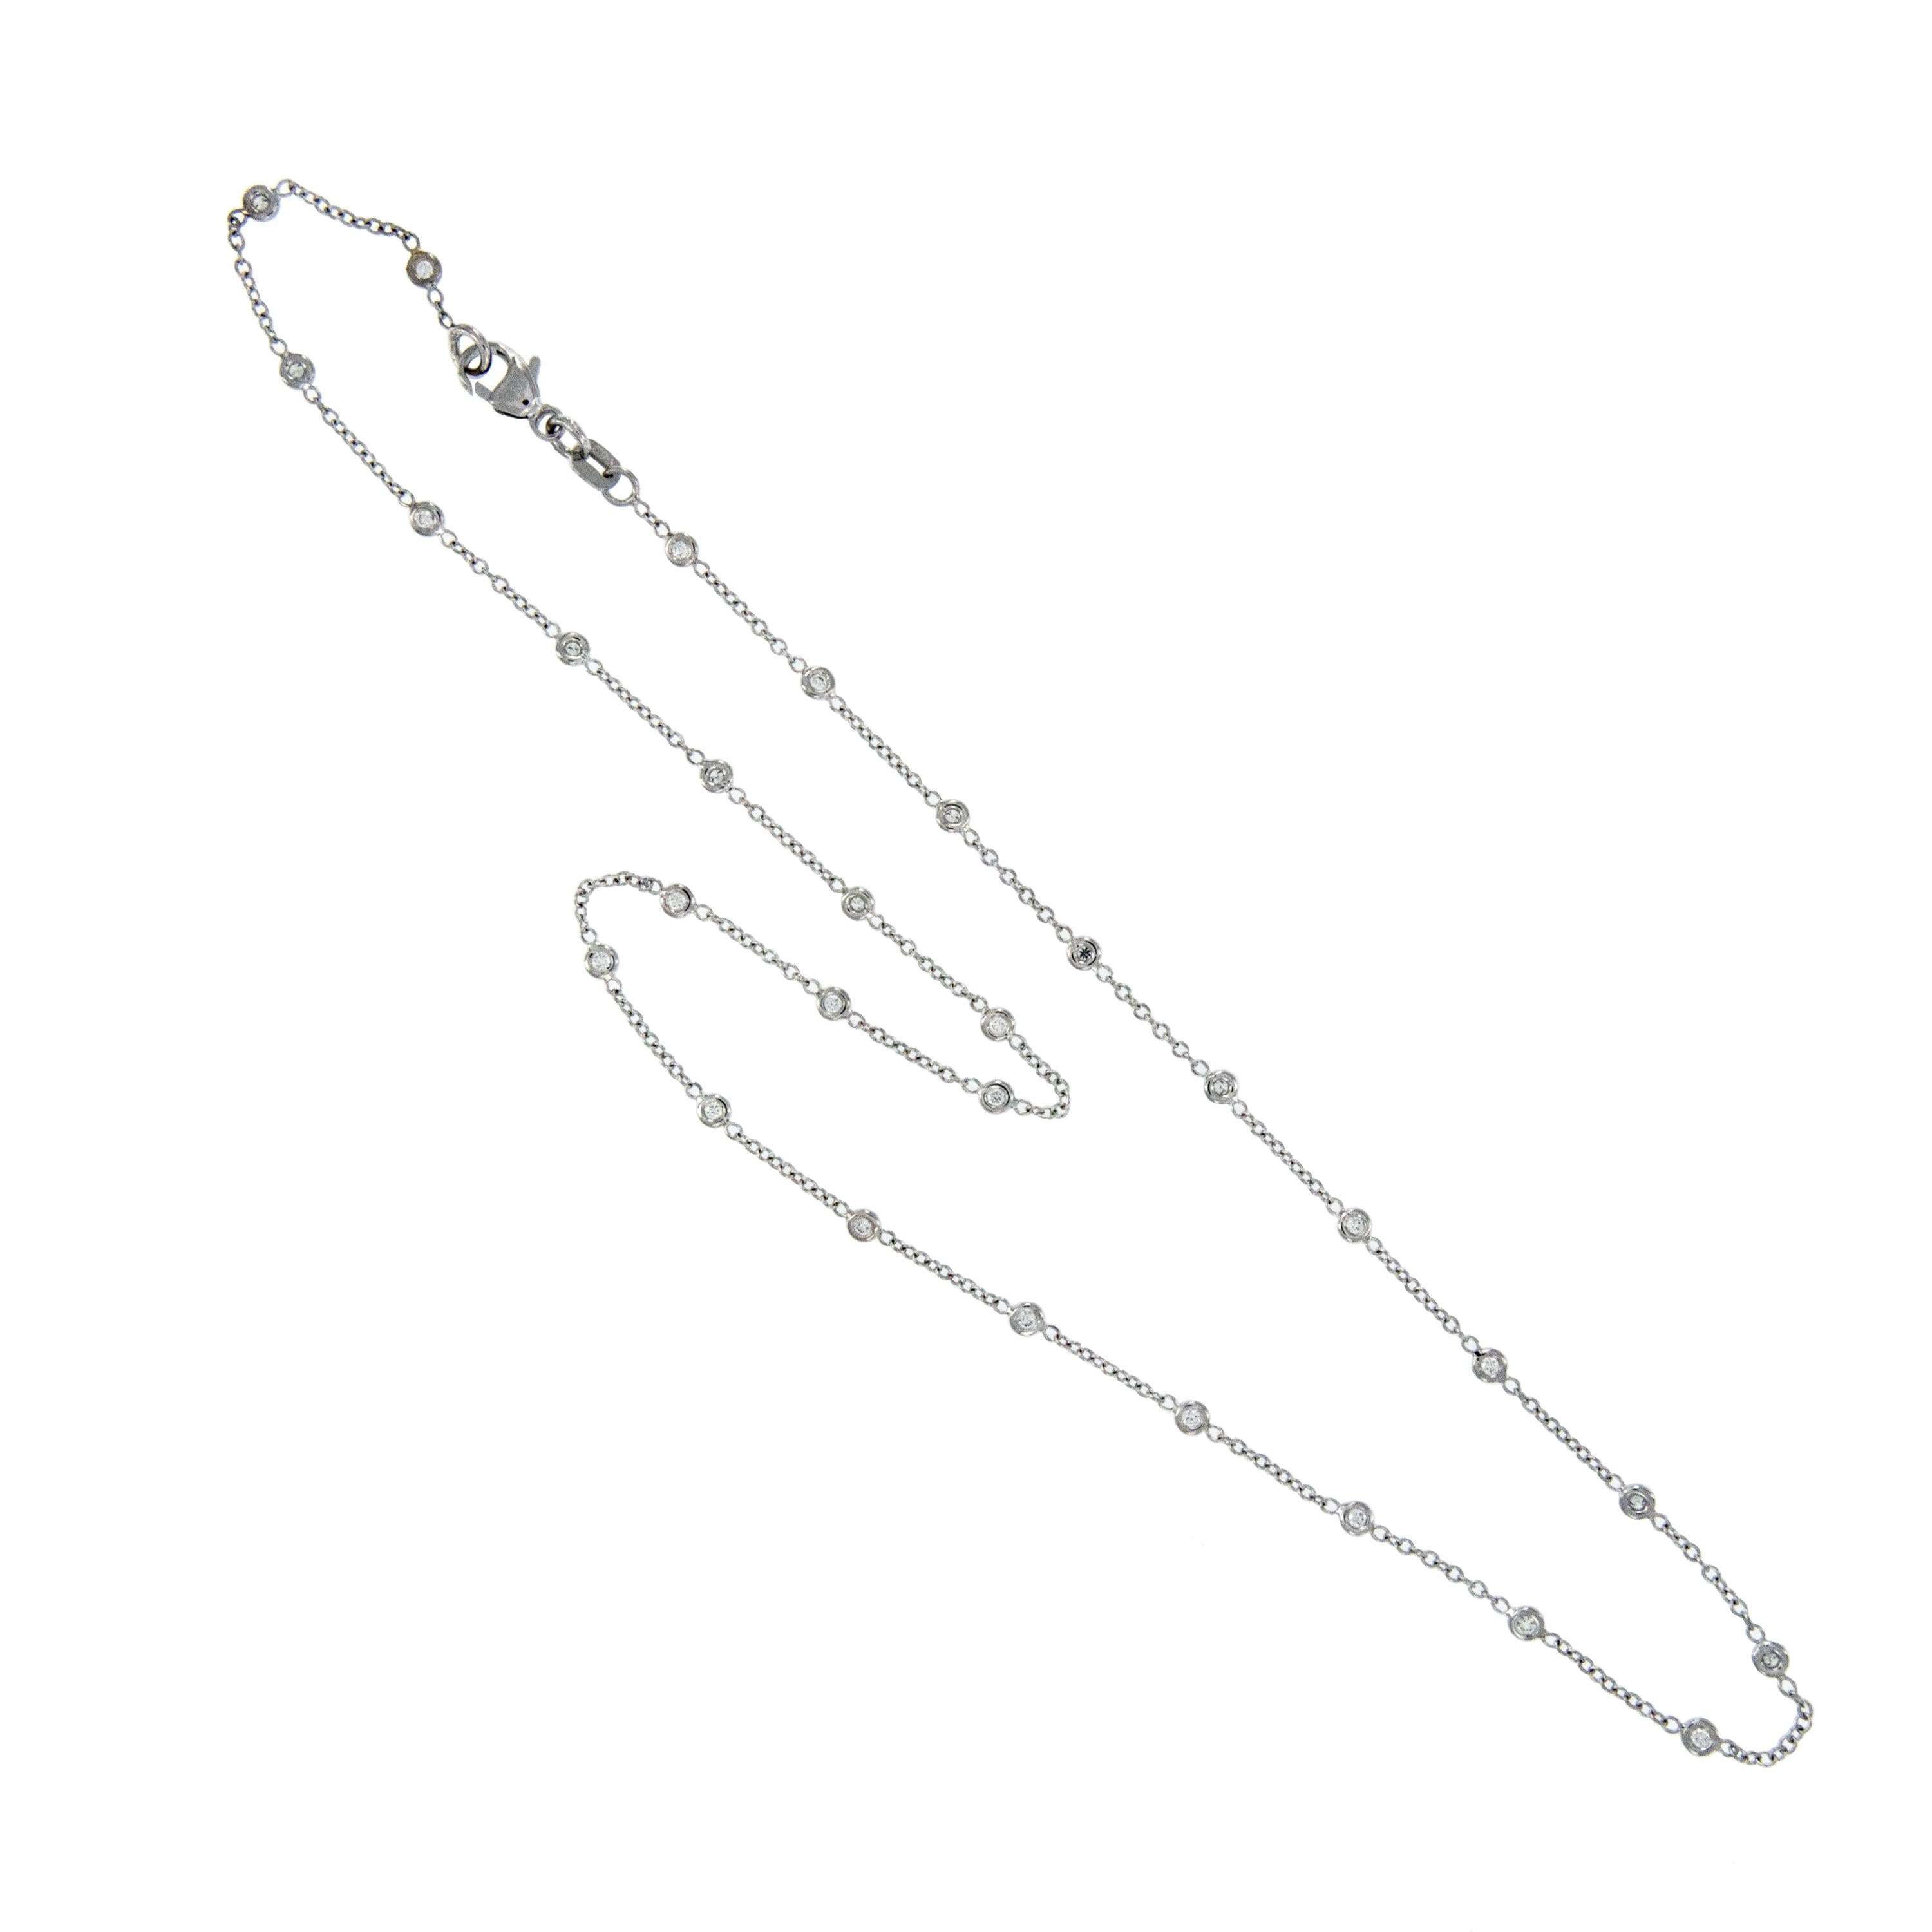 Made of pure, noble platinum with twenty eight fine quality diamonds (VS clarity, F-G color) this station necklace stands the test of time! You can wear every day with jeans, yet it also looks fantastic dressed up on a little black dress! 16